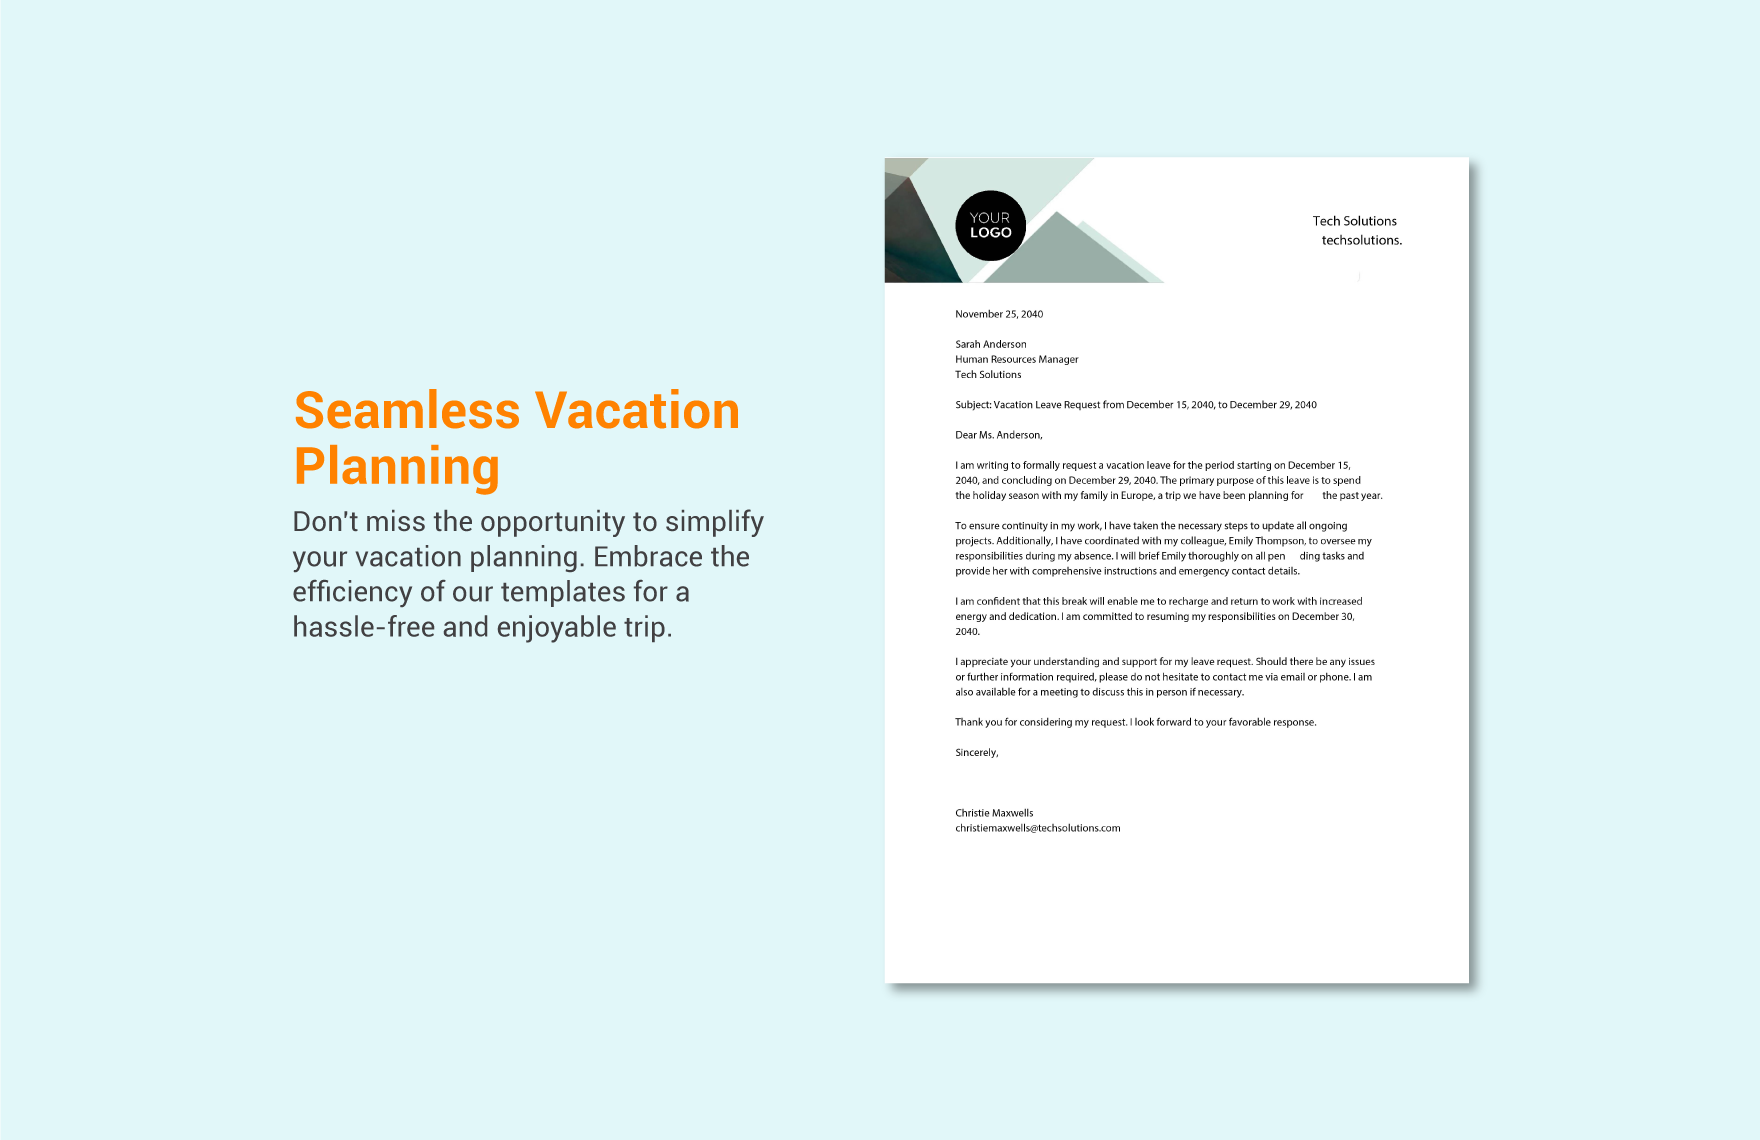 Vacation Letter Template